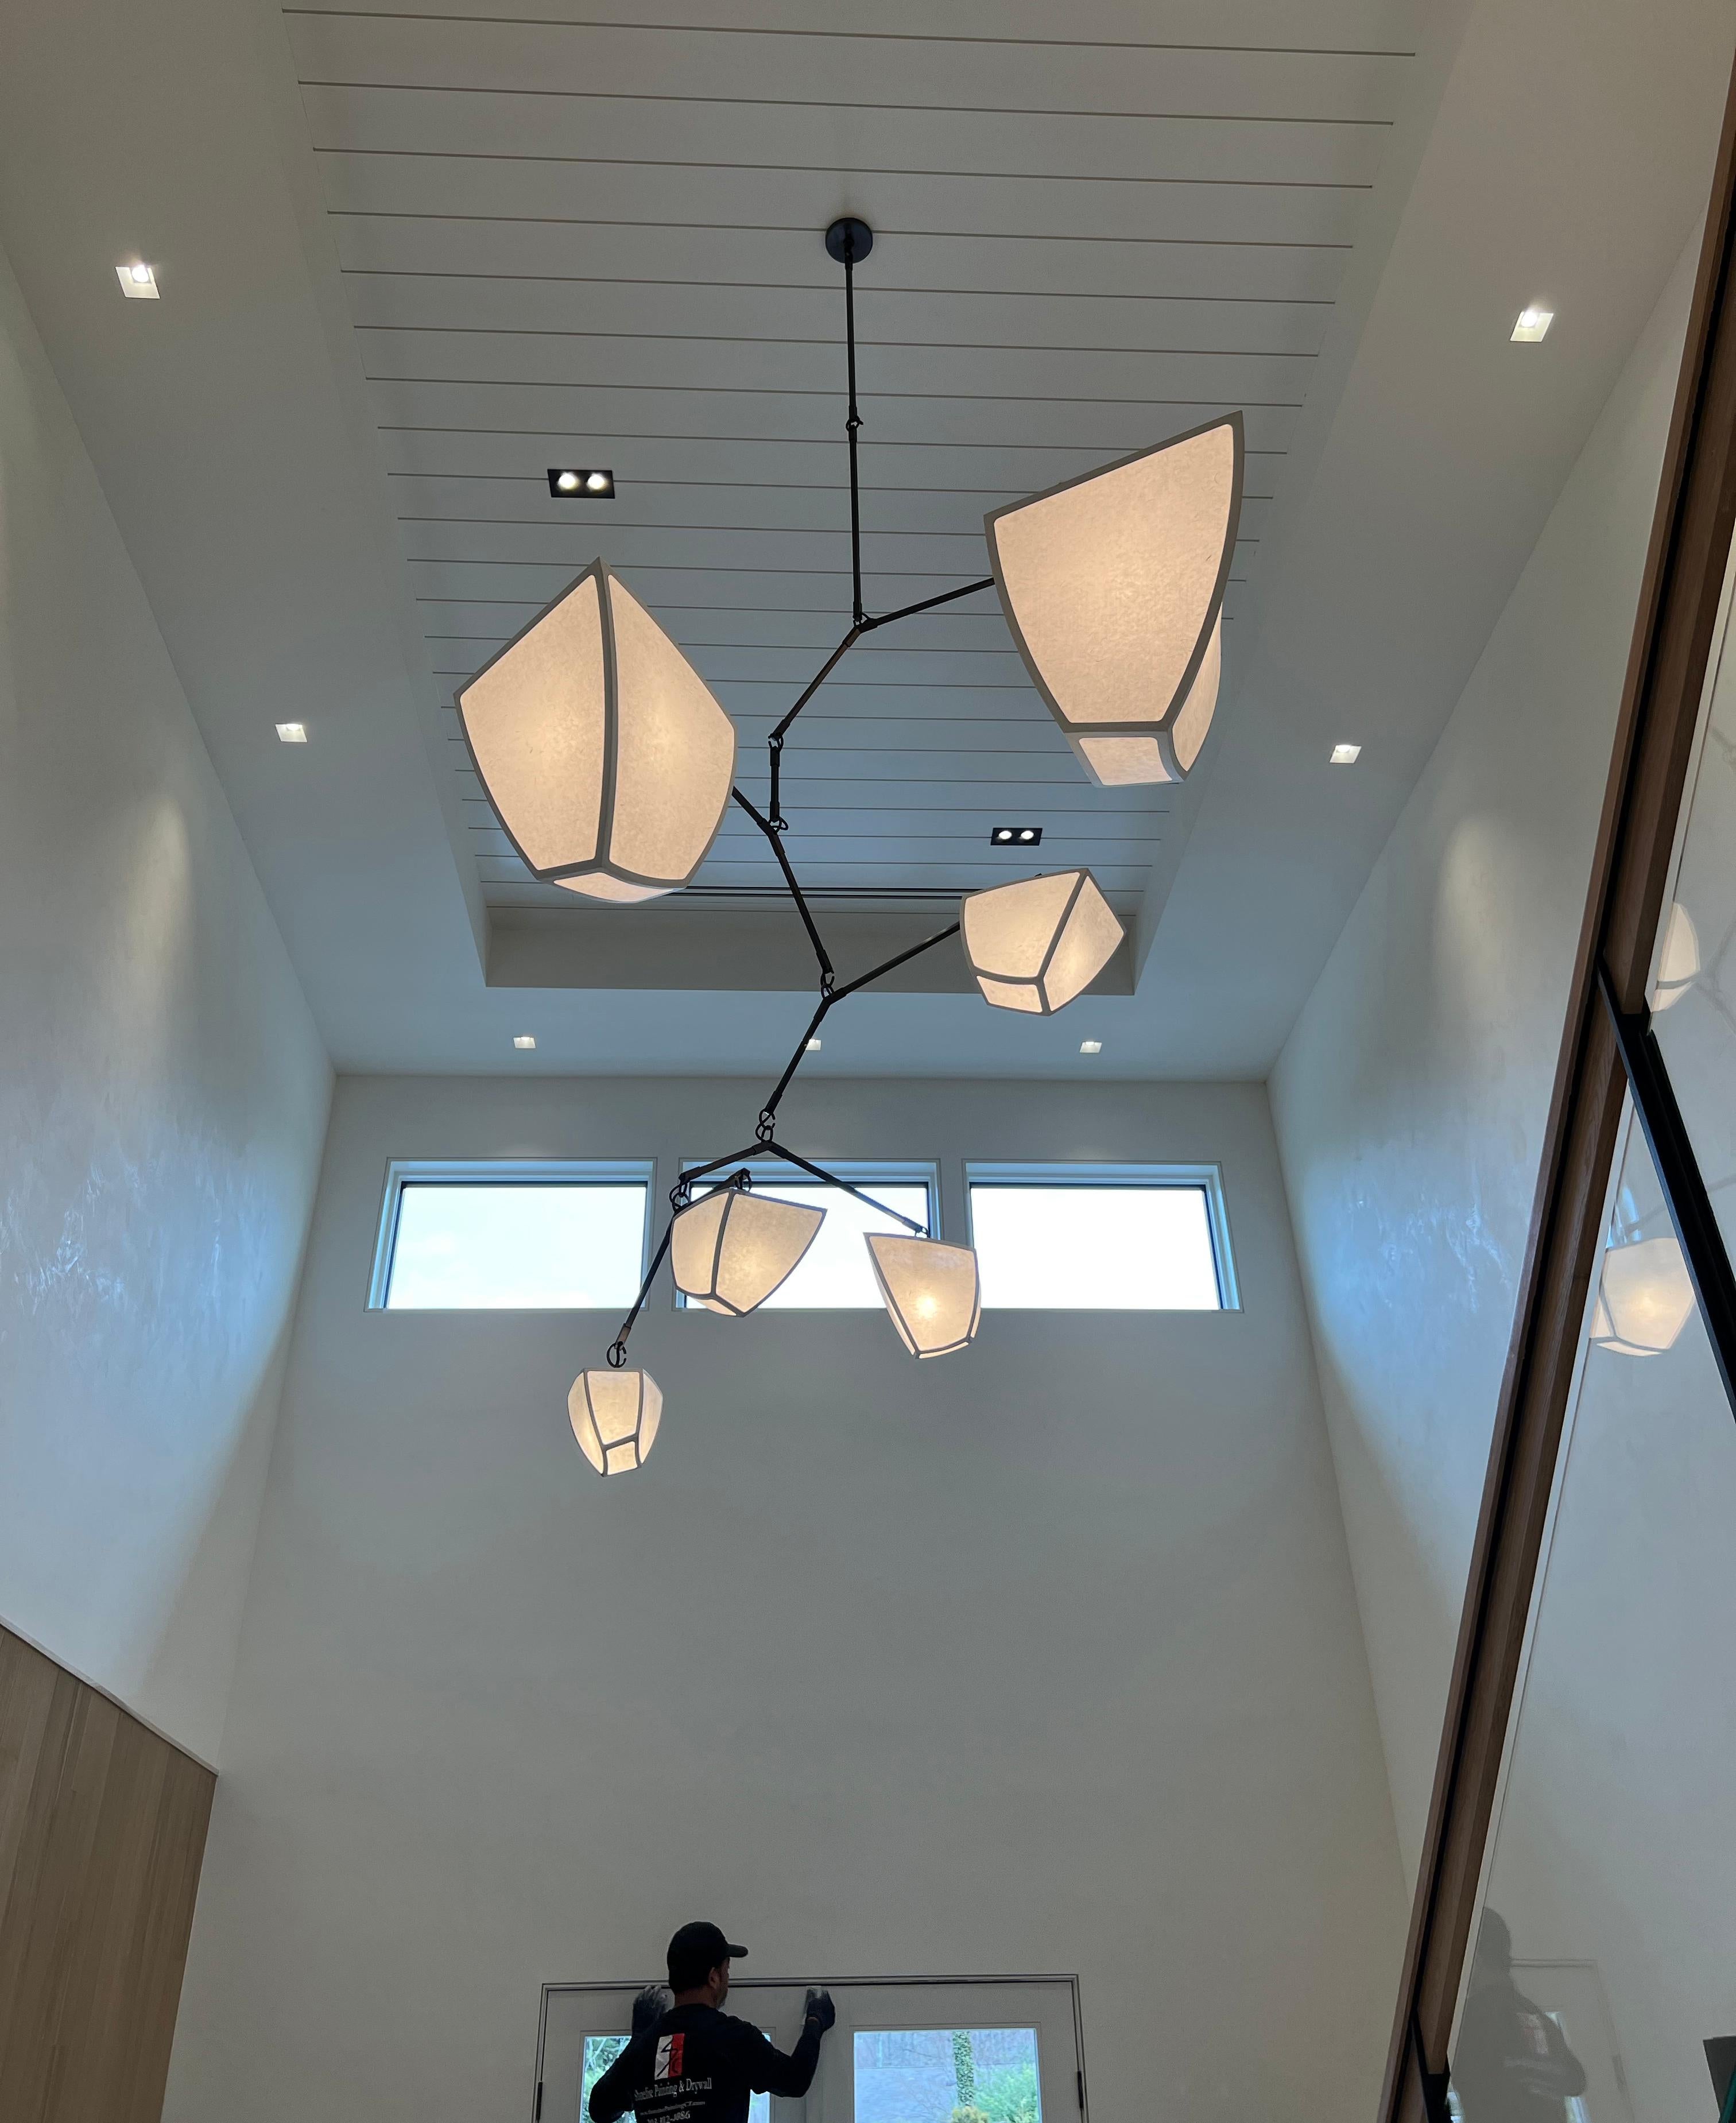 Hanji 6: ABCDFG - is a mobile chandelier with 6 glowing, handmade Hanji paper polyhedron shaped shades arranged in size order. We can make a Hanji fixture in any of our mobile configurations- Cassiopeia, Ivy, or Constantin.

Hanji Paper is an